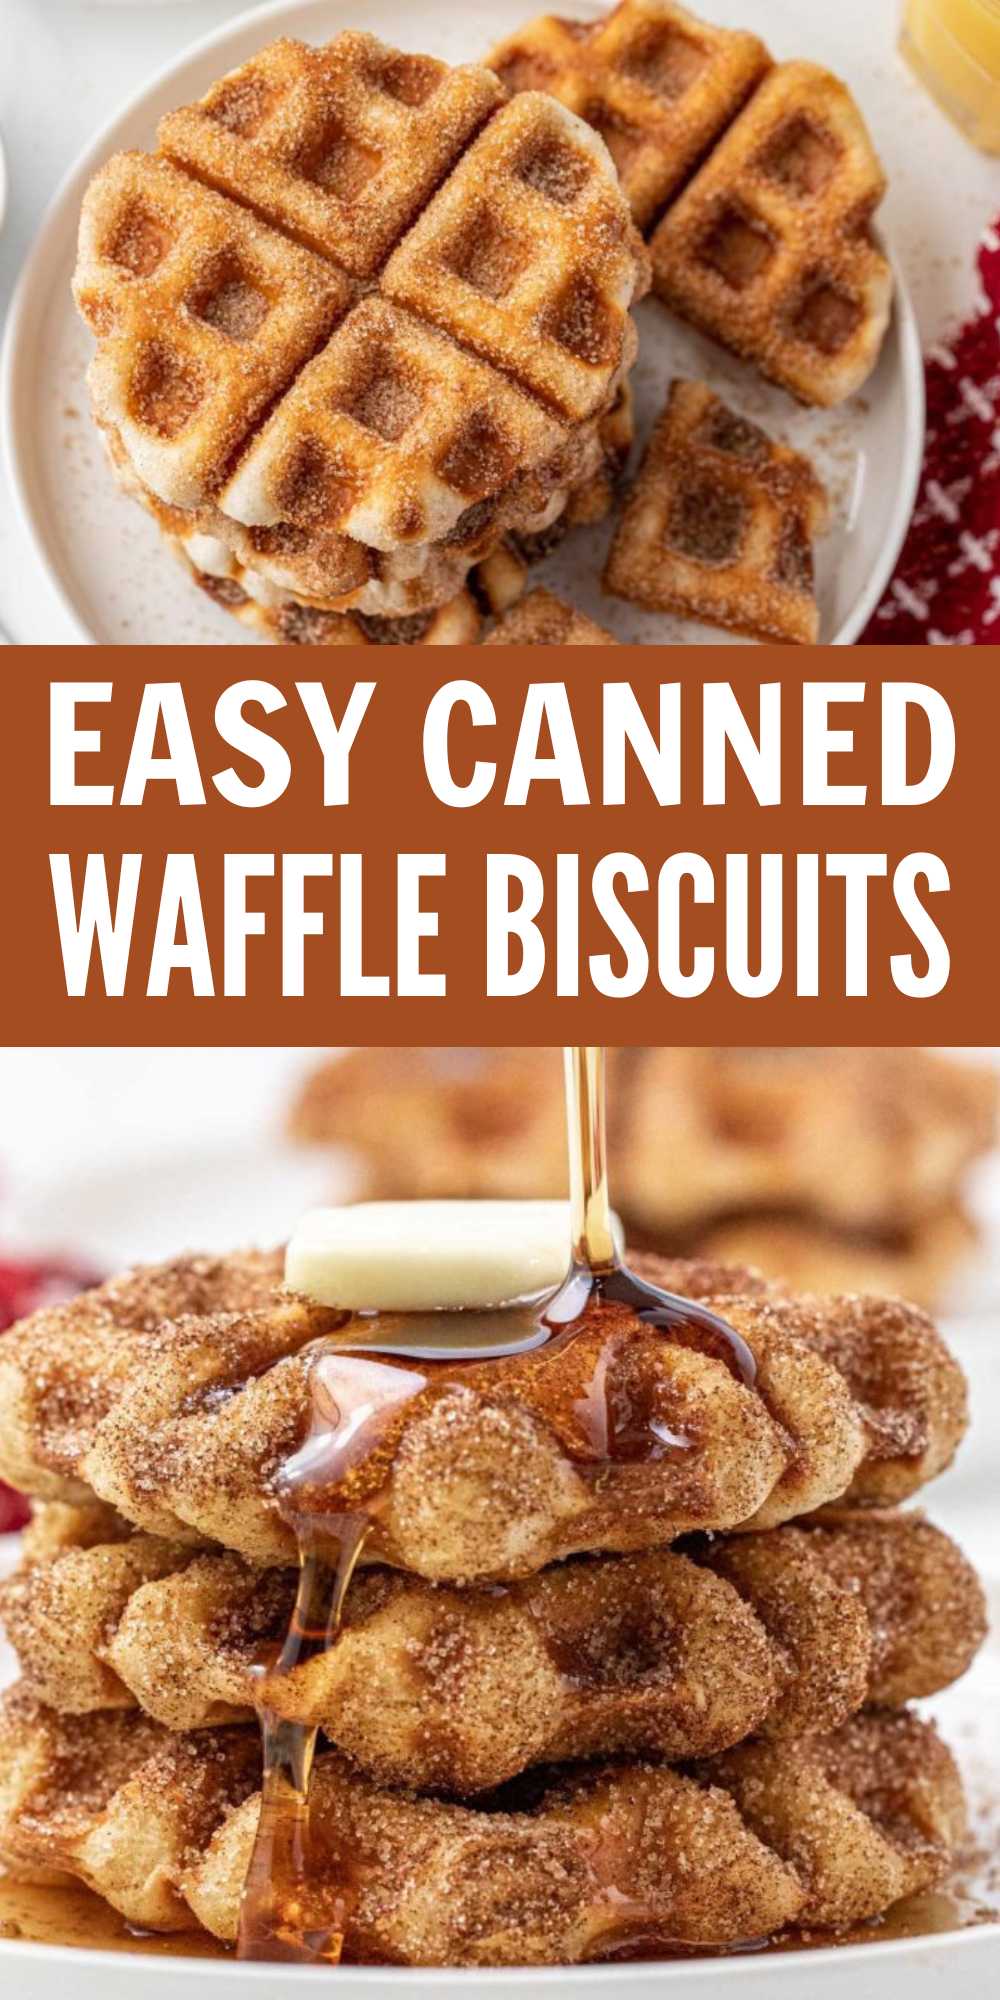 These Canned Waffle Biscuits are a quick and easy way to make waffles. Toss in a cinnamon and sugar mixture for a delicious breakfast idea. We love this quick and easy breakfast ideas. #eatingonadime #cannedwafflebiscuits #wafflebiscuits